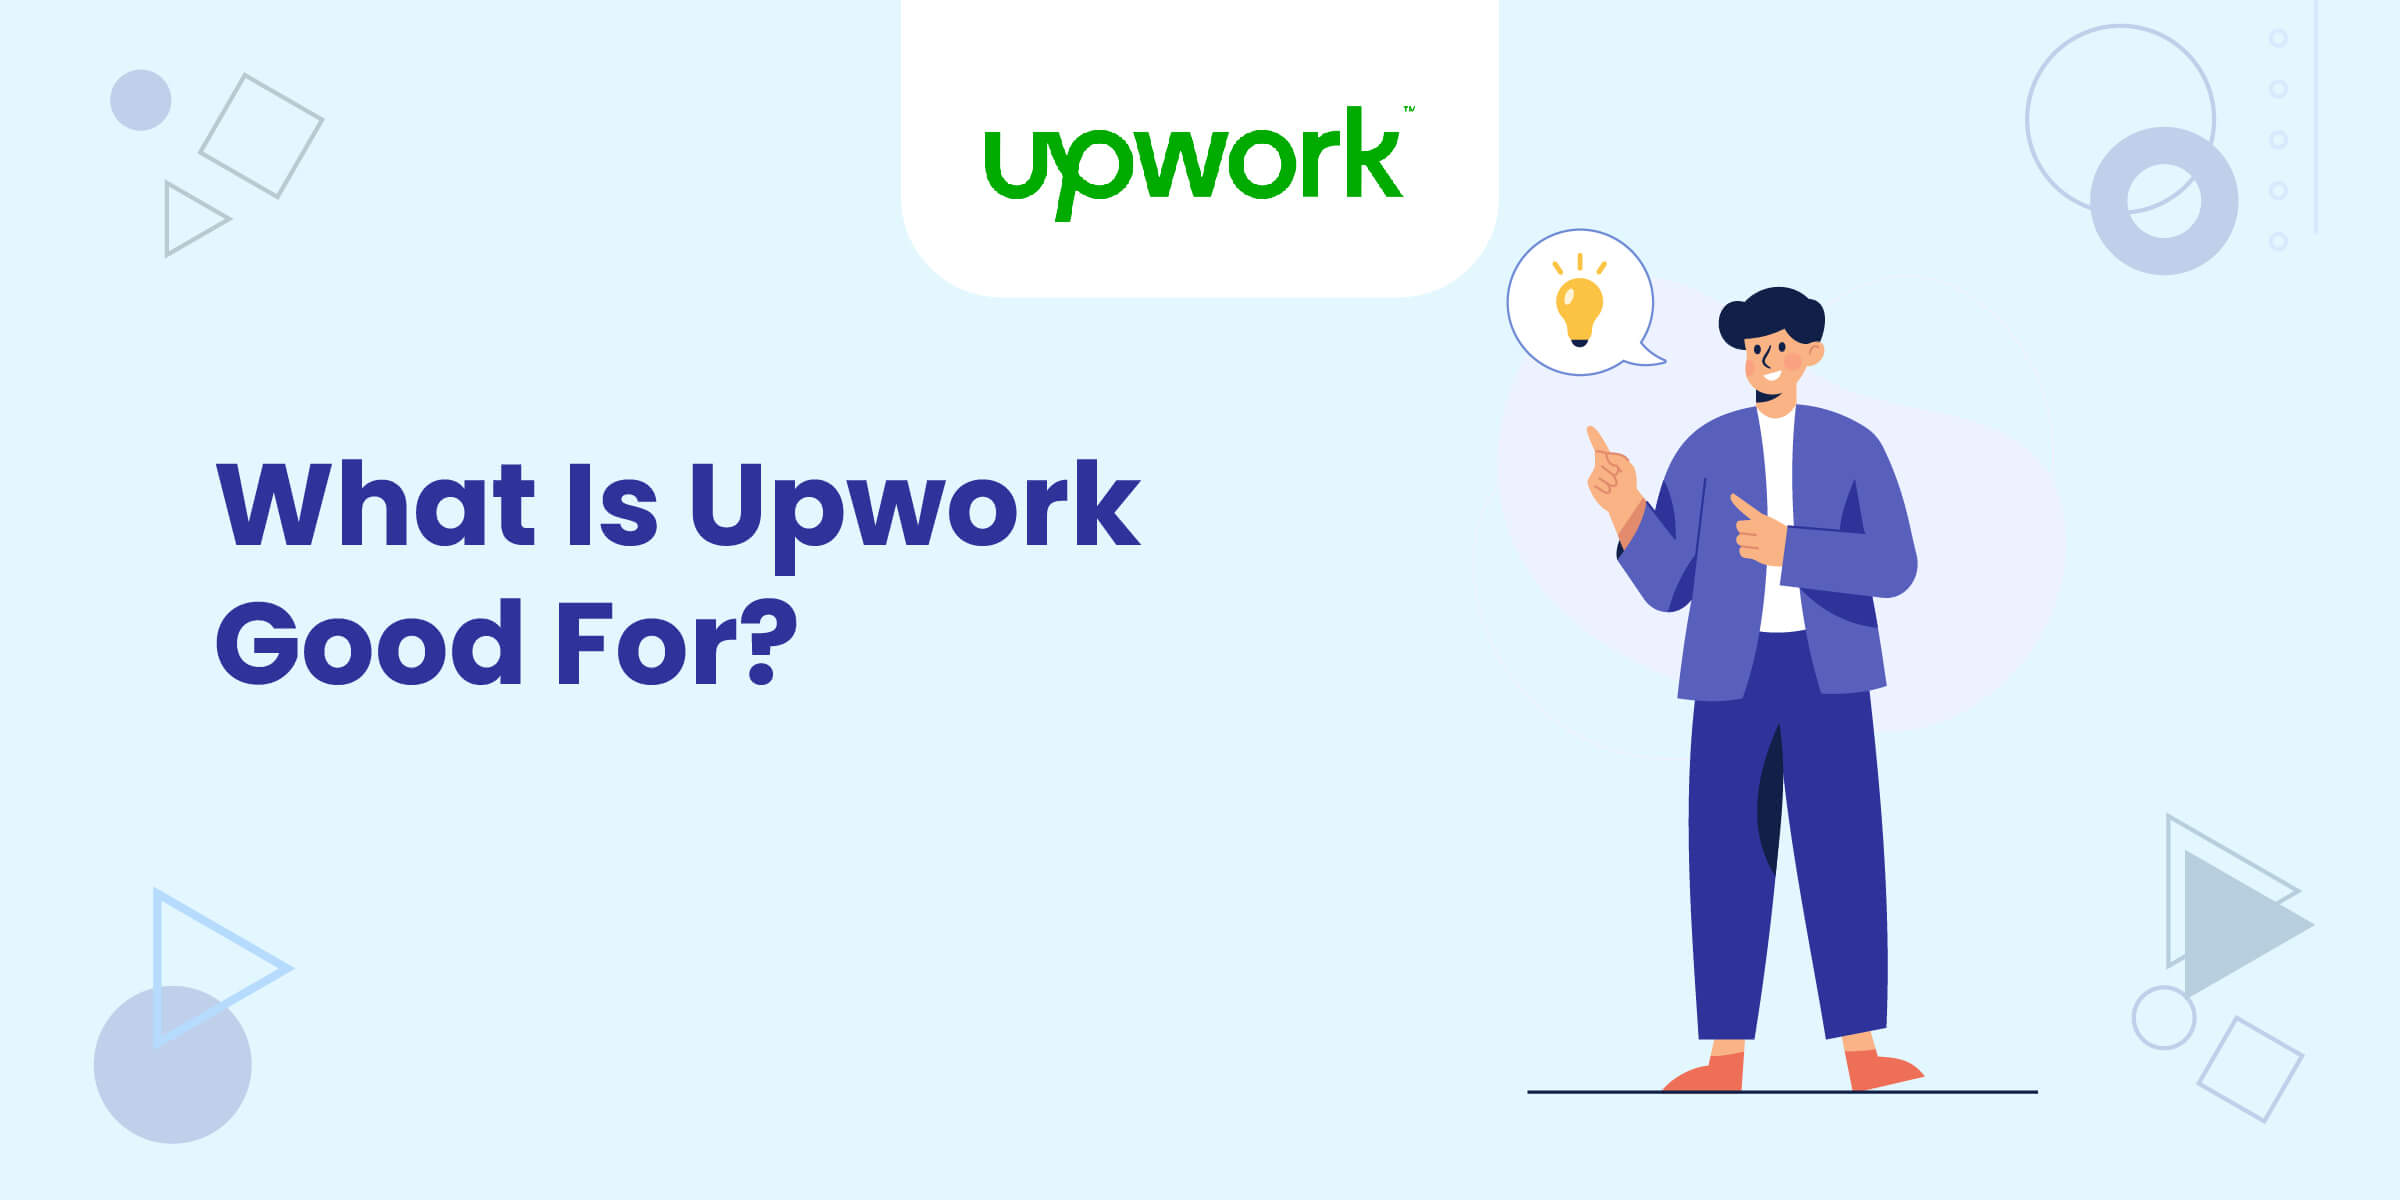 What Is Upwork Good For